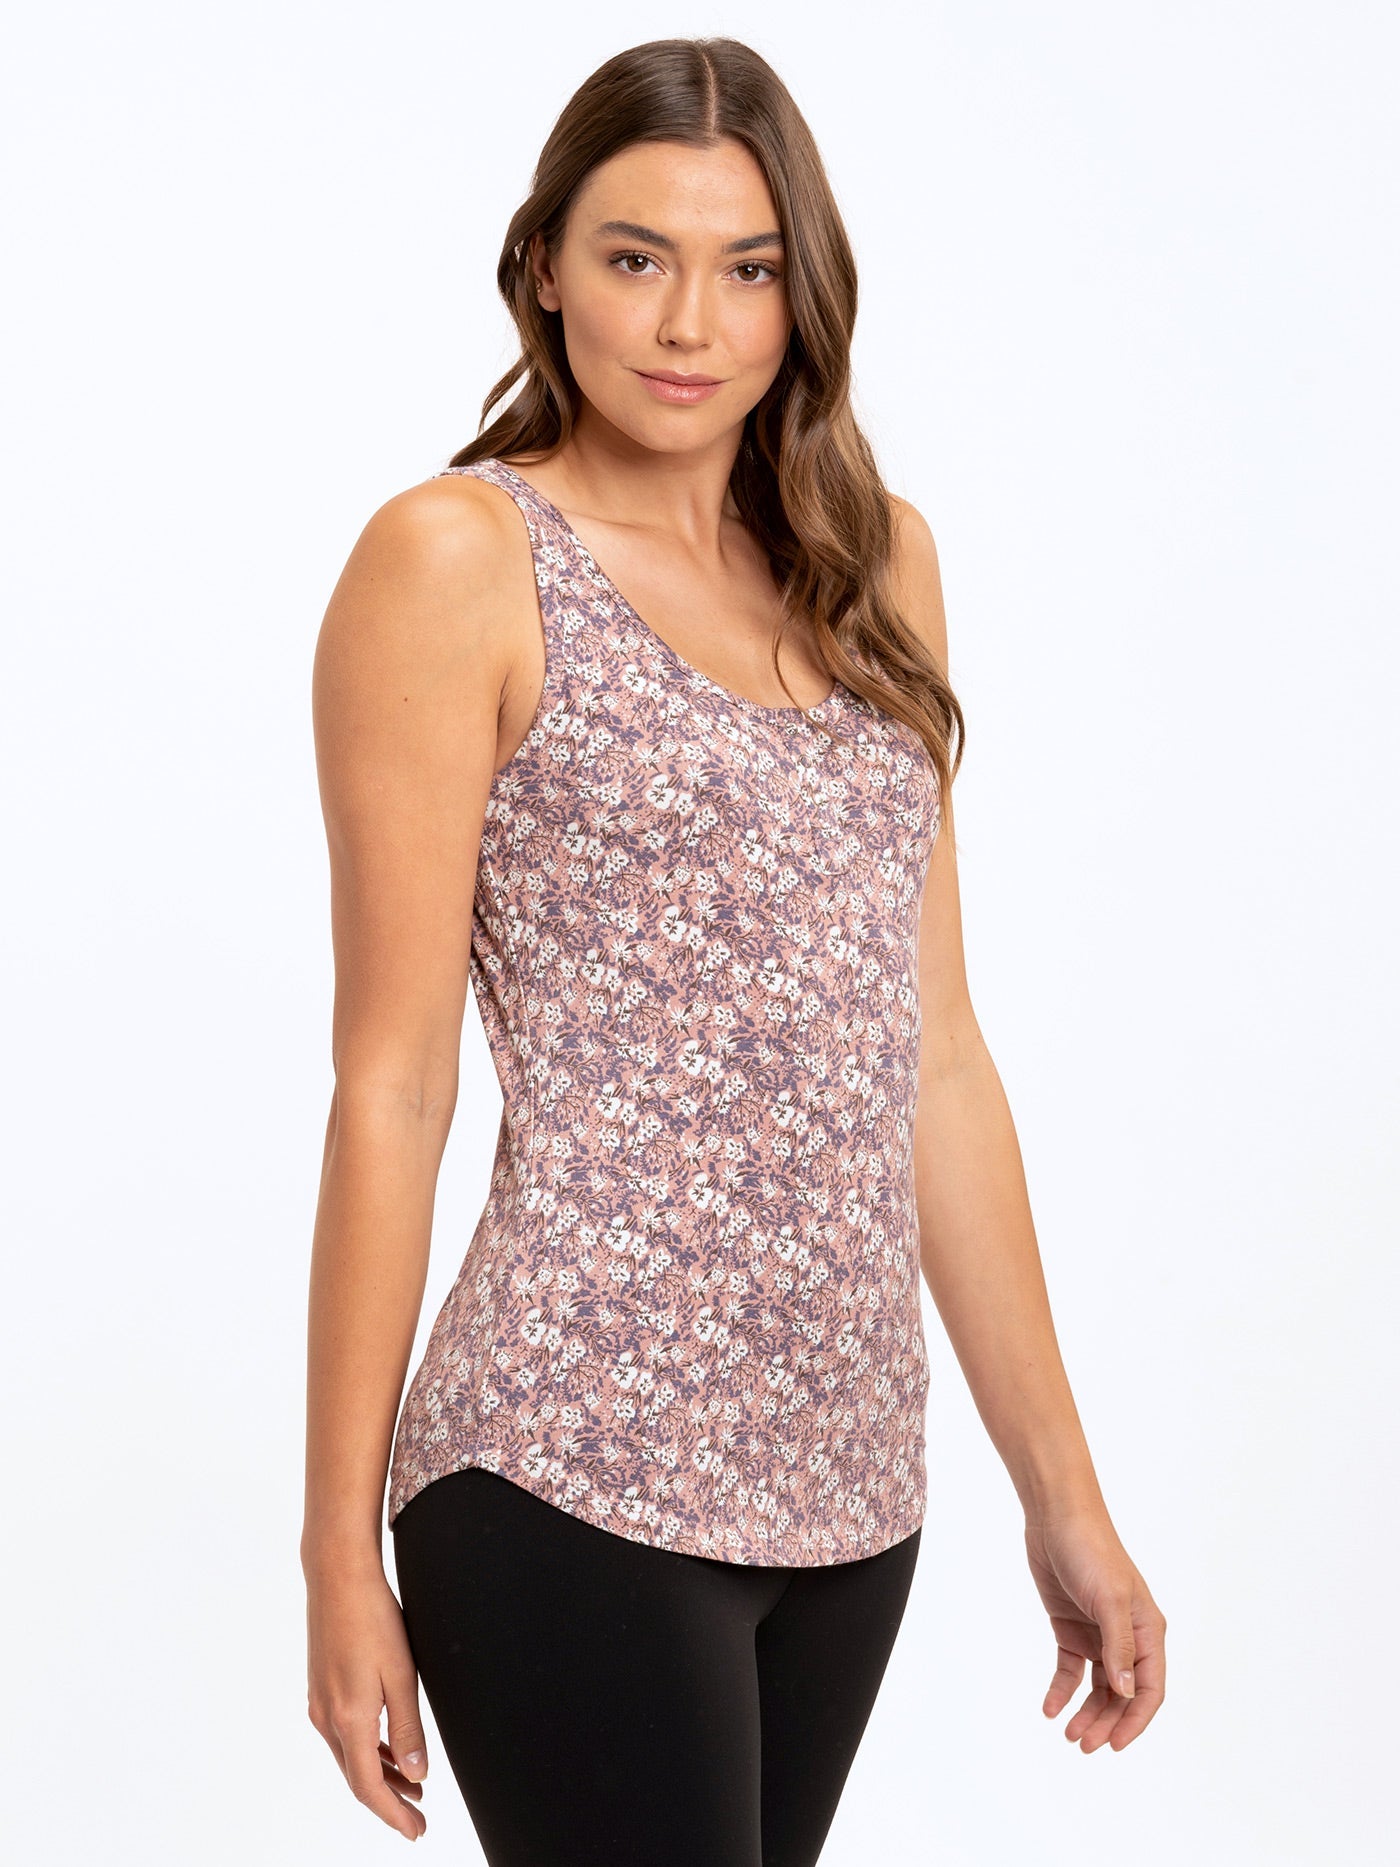 Evalynn Wildflower Ditsy Tank Womens Tops Tanks Threads 4 Thought 